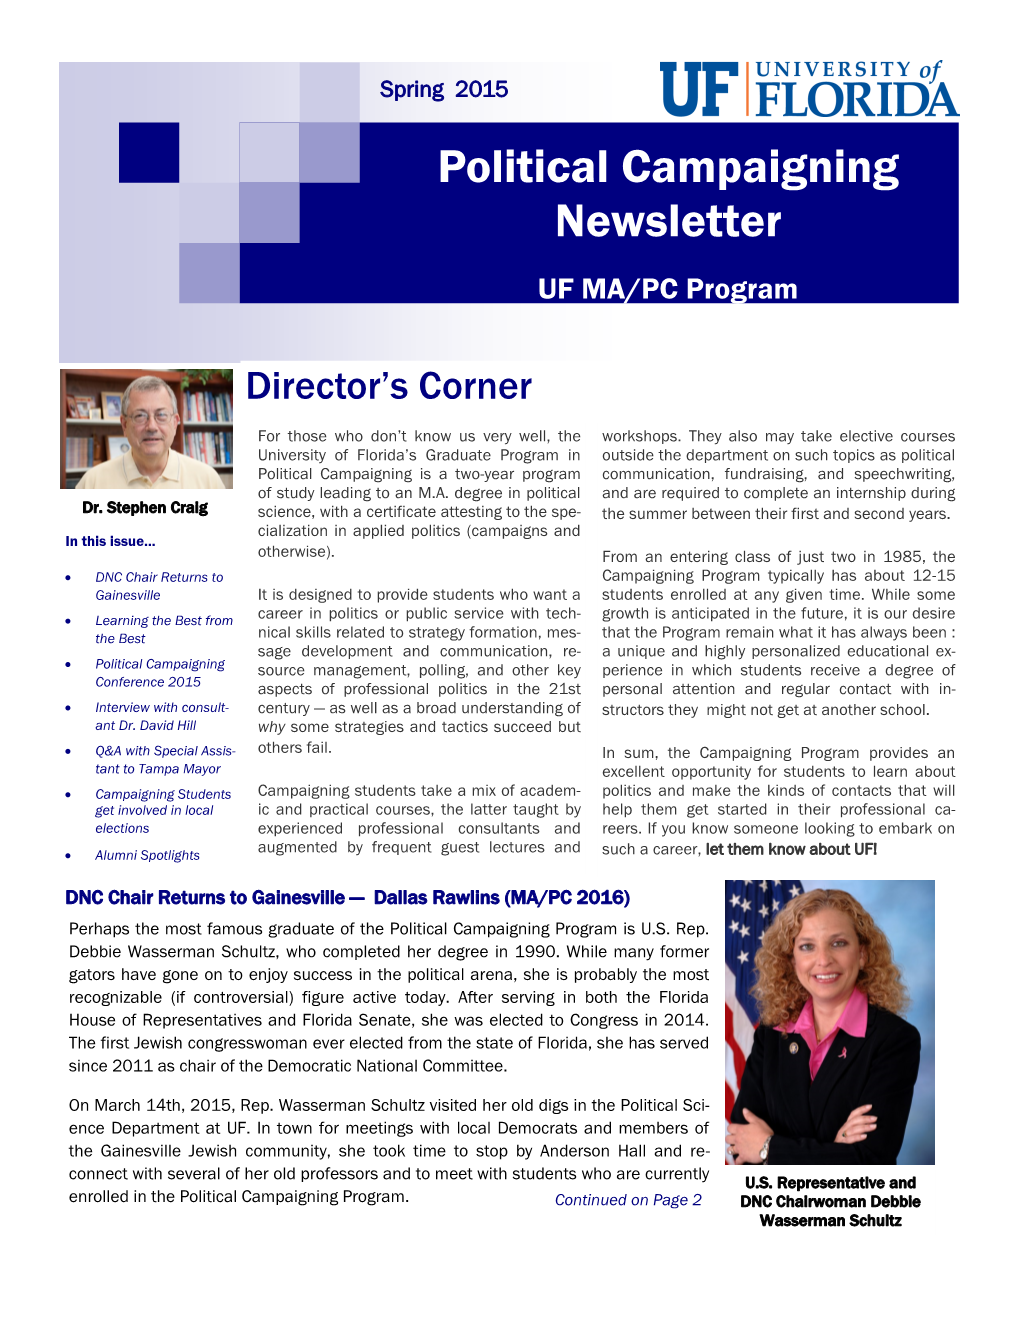 Political Campaigning Newsletter UF MA/PC Program